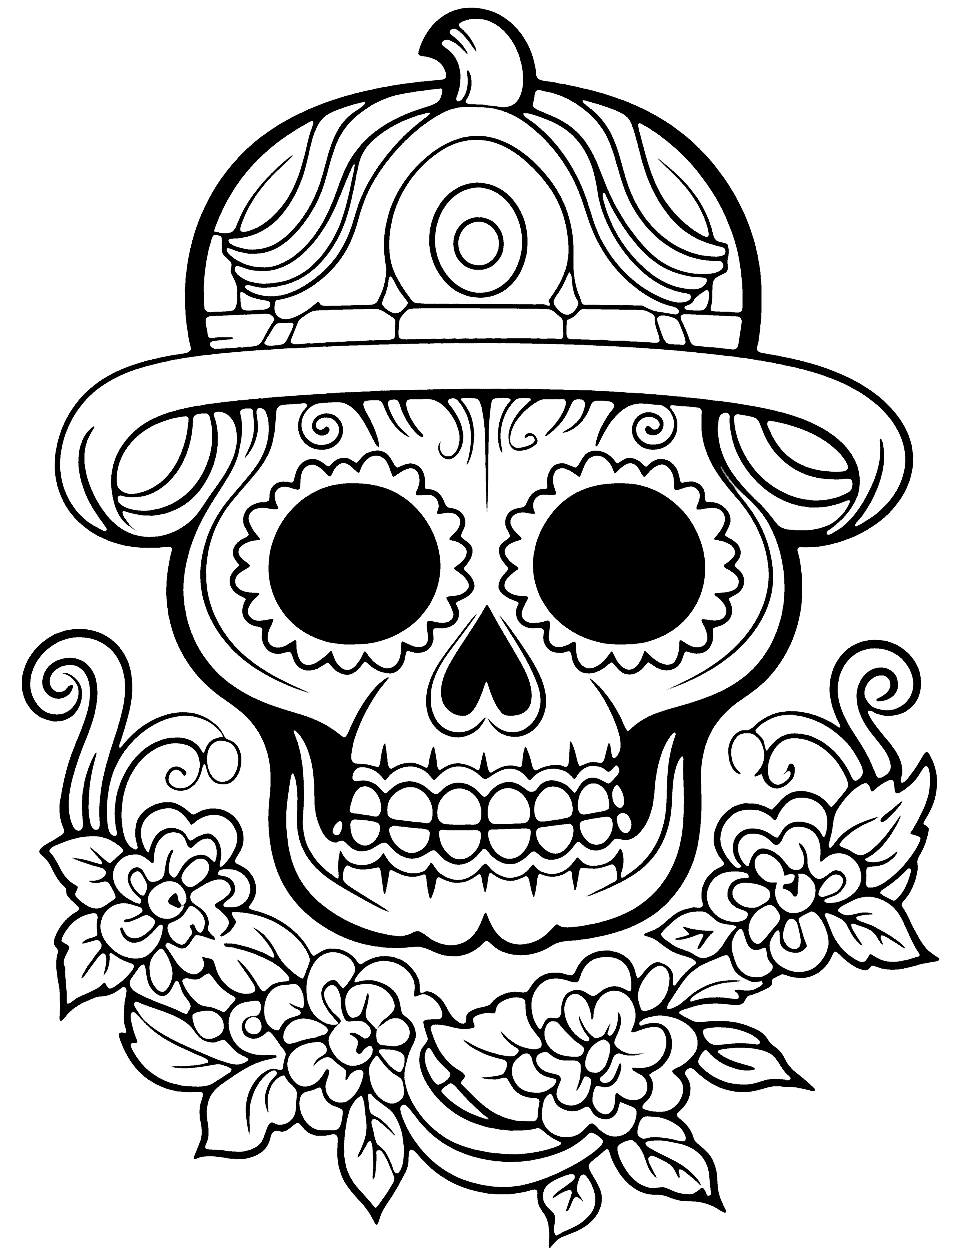 Day of the Dead Skull Halloween Coloring Page - A detailed design inspired by Dia de Los Muertos sugar skulls for those who enjoy a more intricate coloring project.